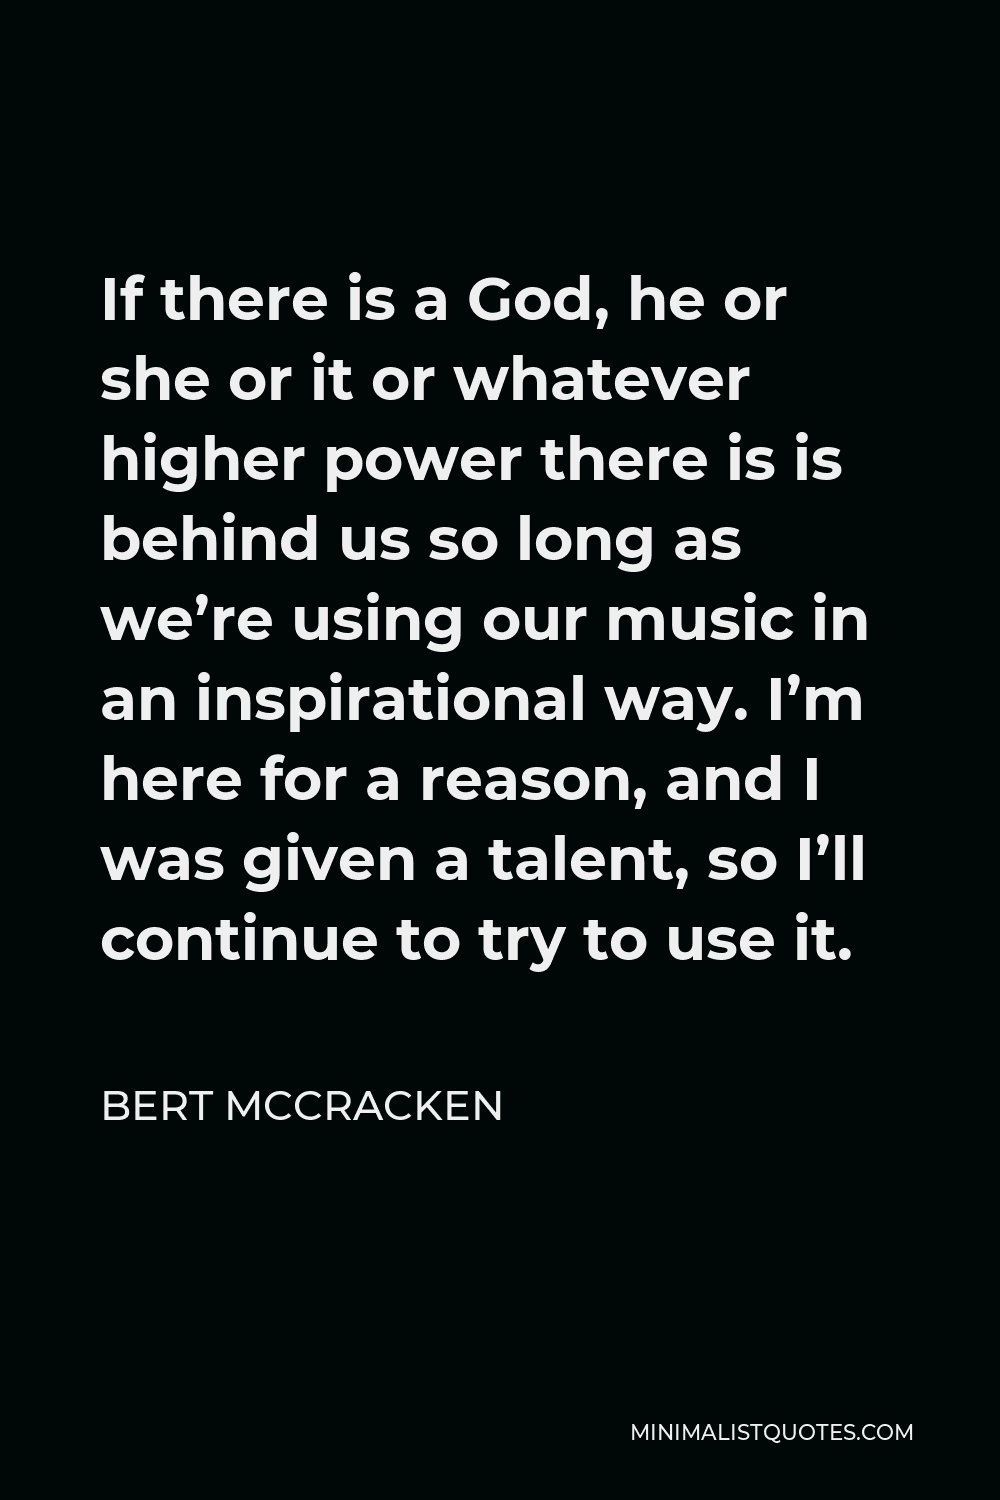 Bert McCracken Quote - If there is a God, he or she or it or whatever higher power there is is behind us so long as we’re using our music in an inspirational way. I’m here for a reason, and I was given a talent, so I’ll continue to try to use it.